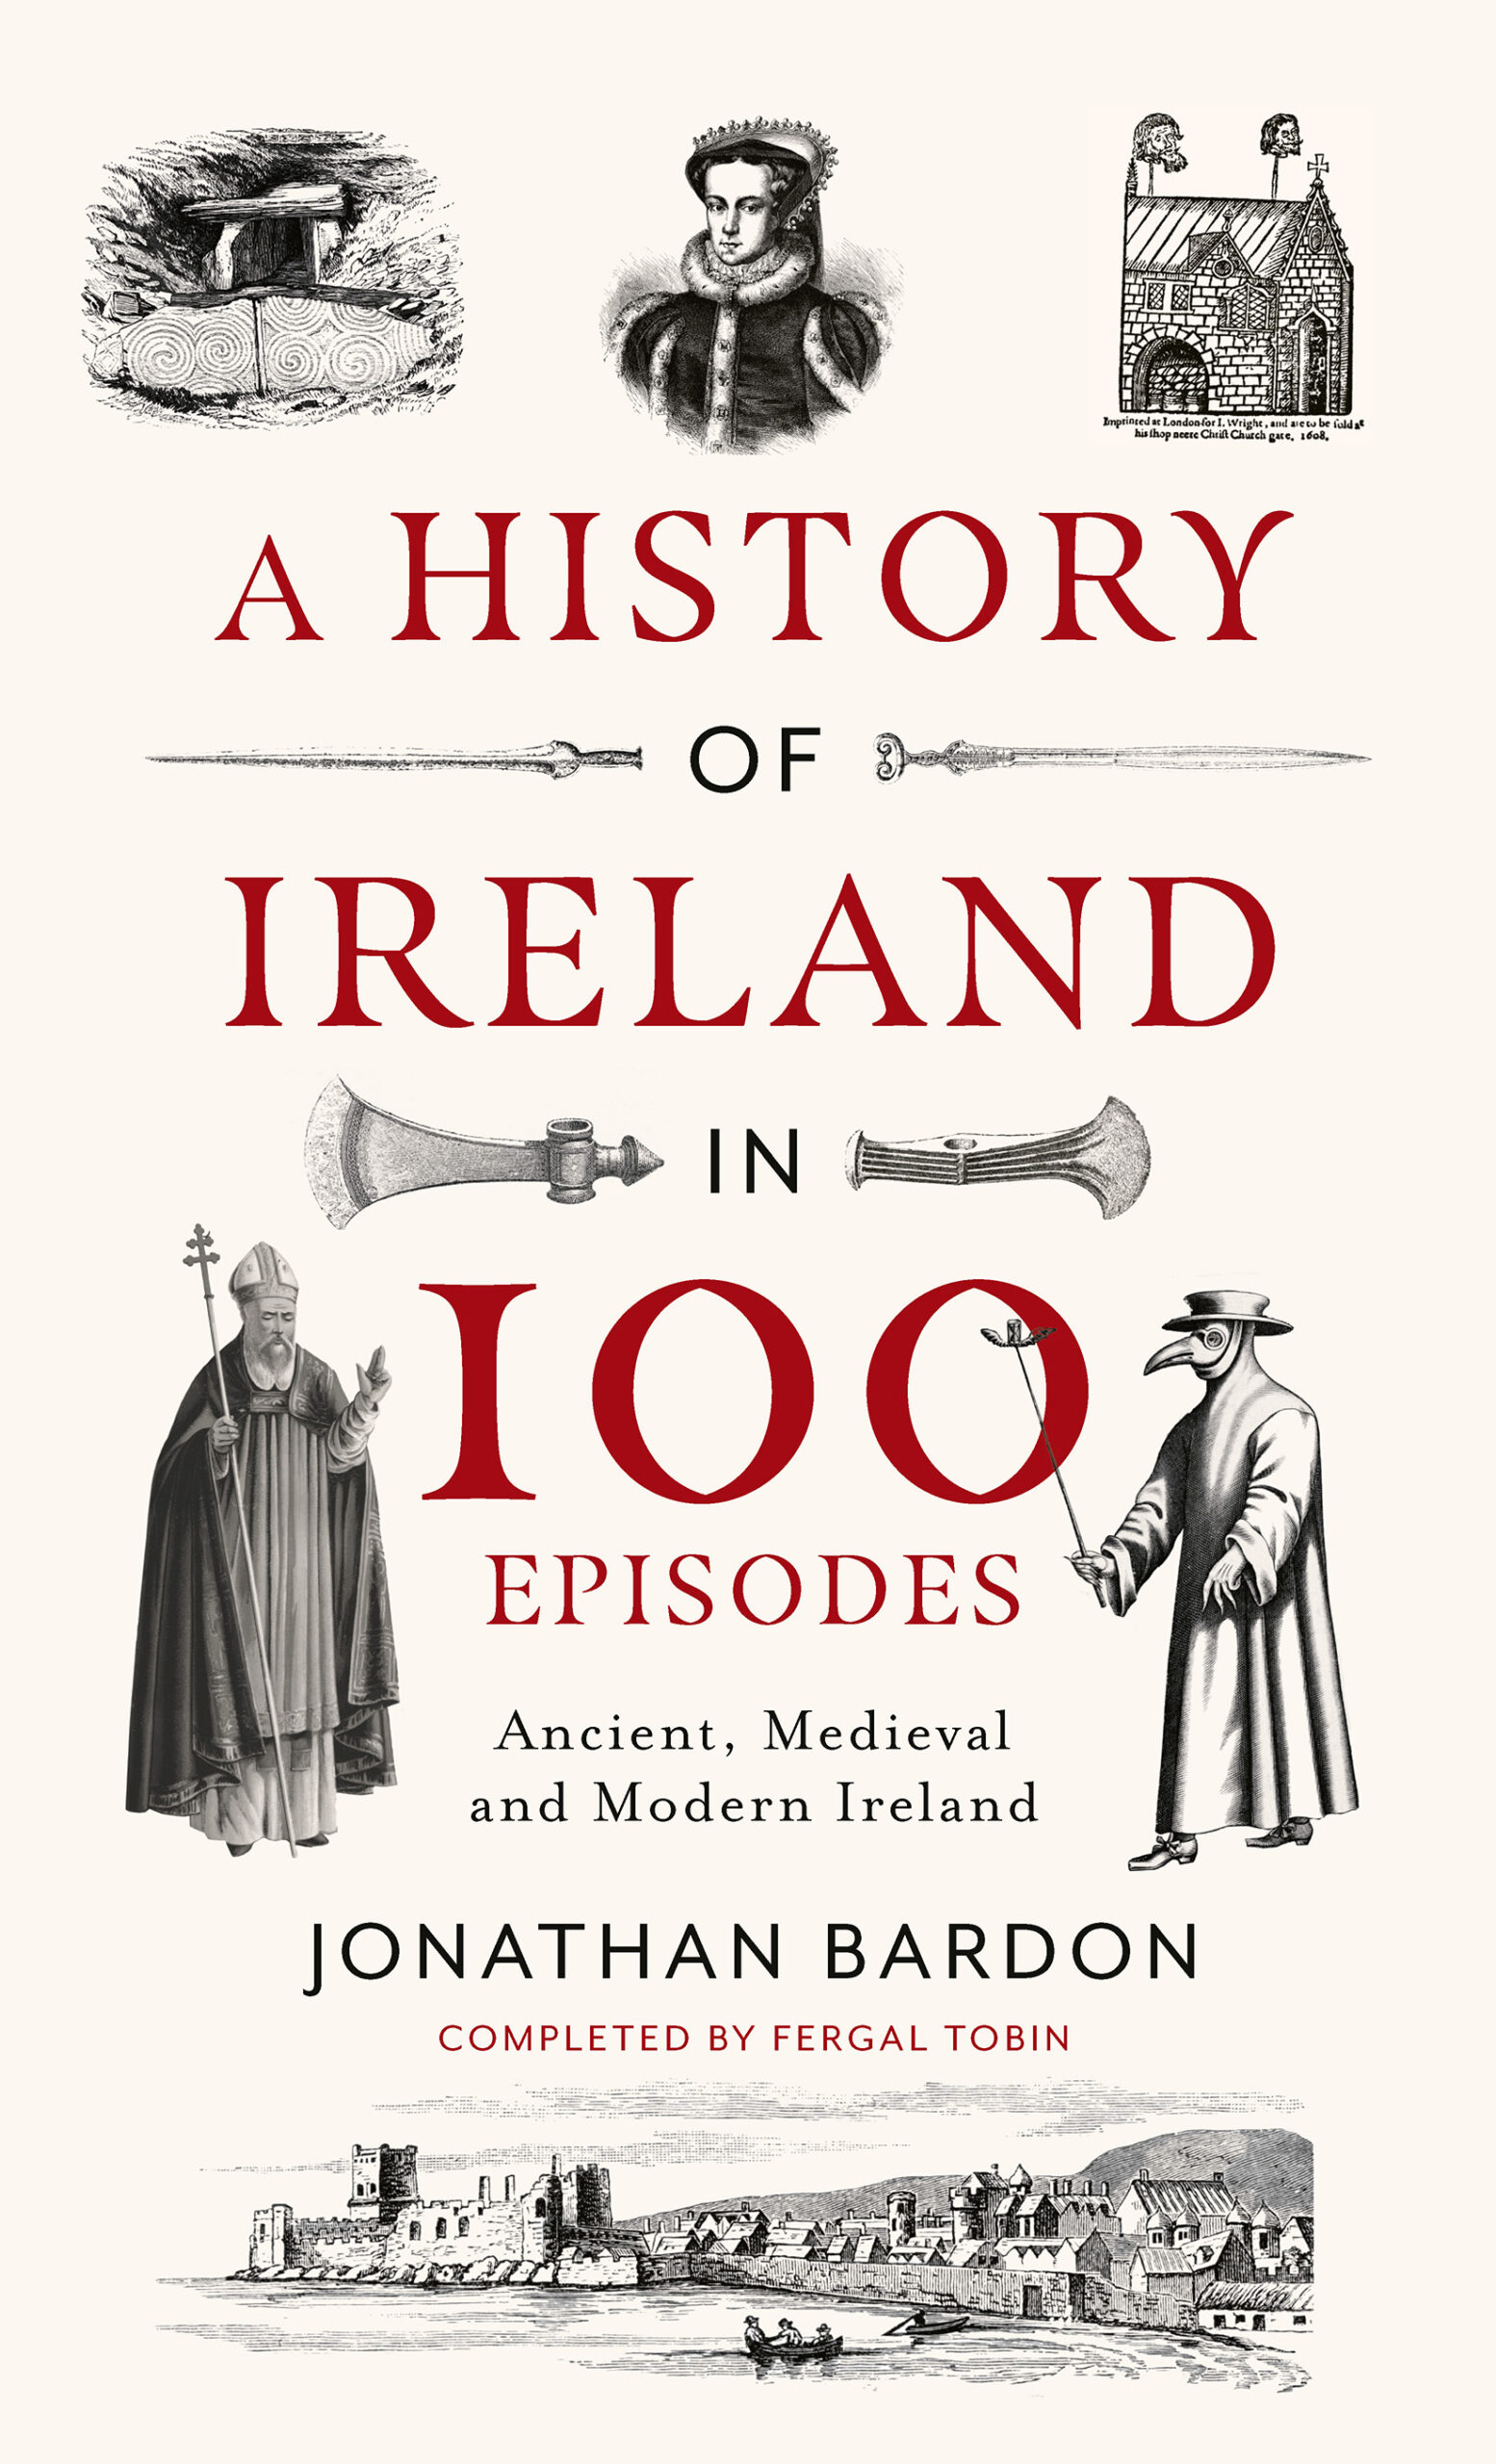 A History of Ireland in 100 Episodes by Jonathan Bardon